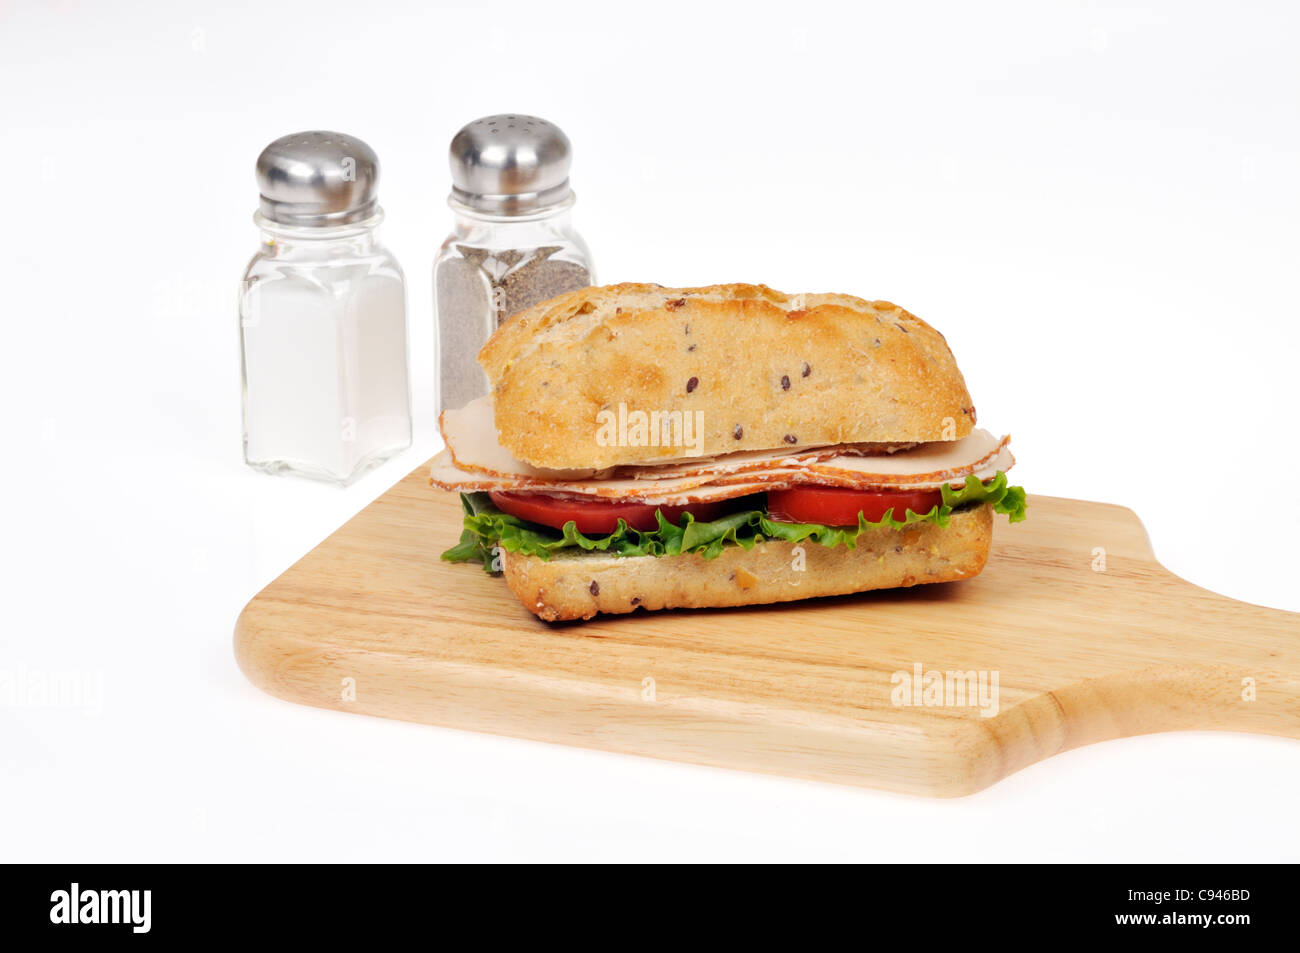 Chicken sandwich with lettuce and tomato on ciabatta bread roll with salt and pepper shakers on wood chopping board on white. Stock Photo